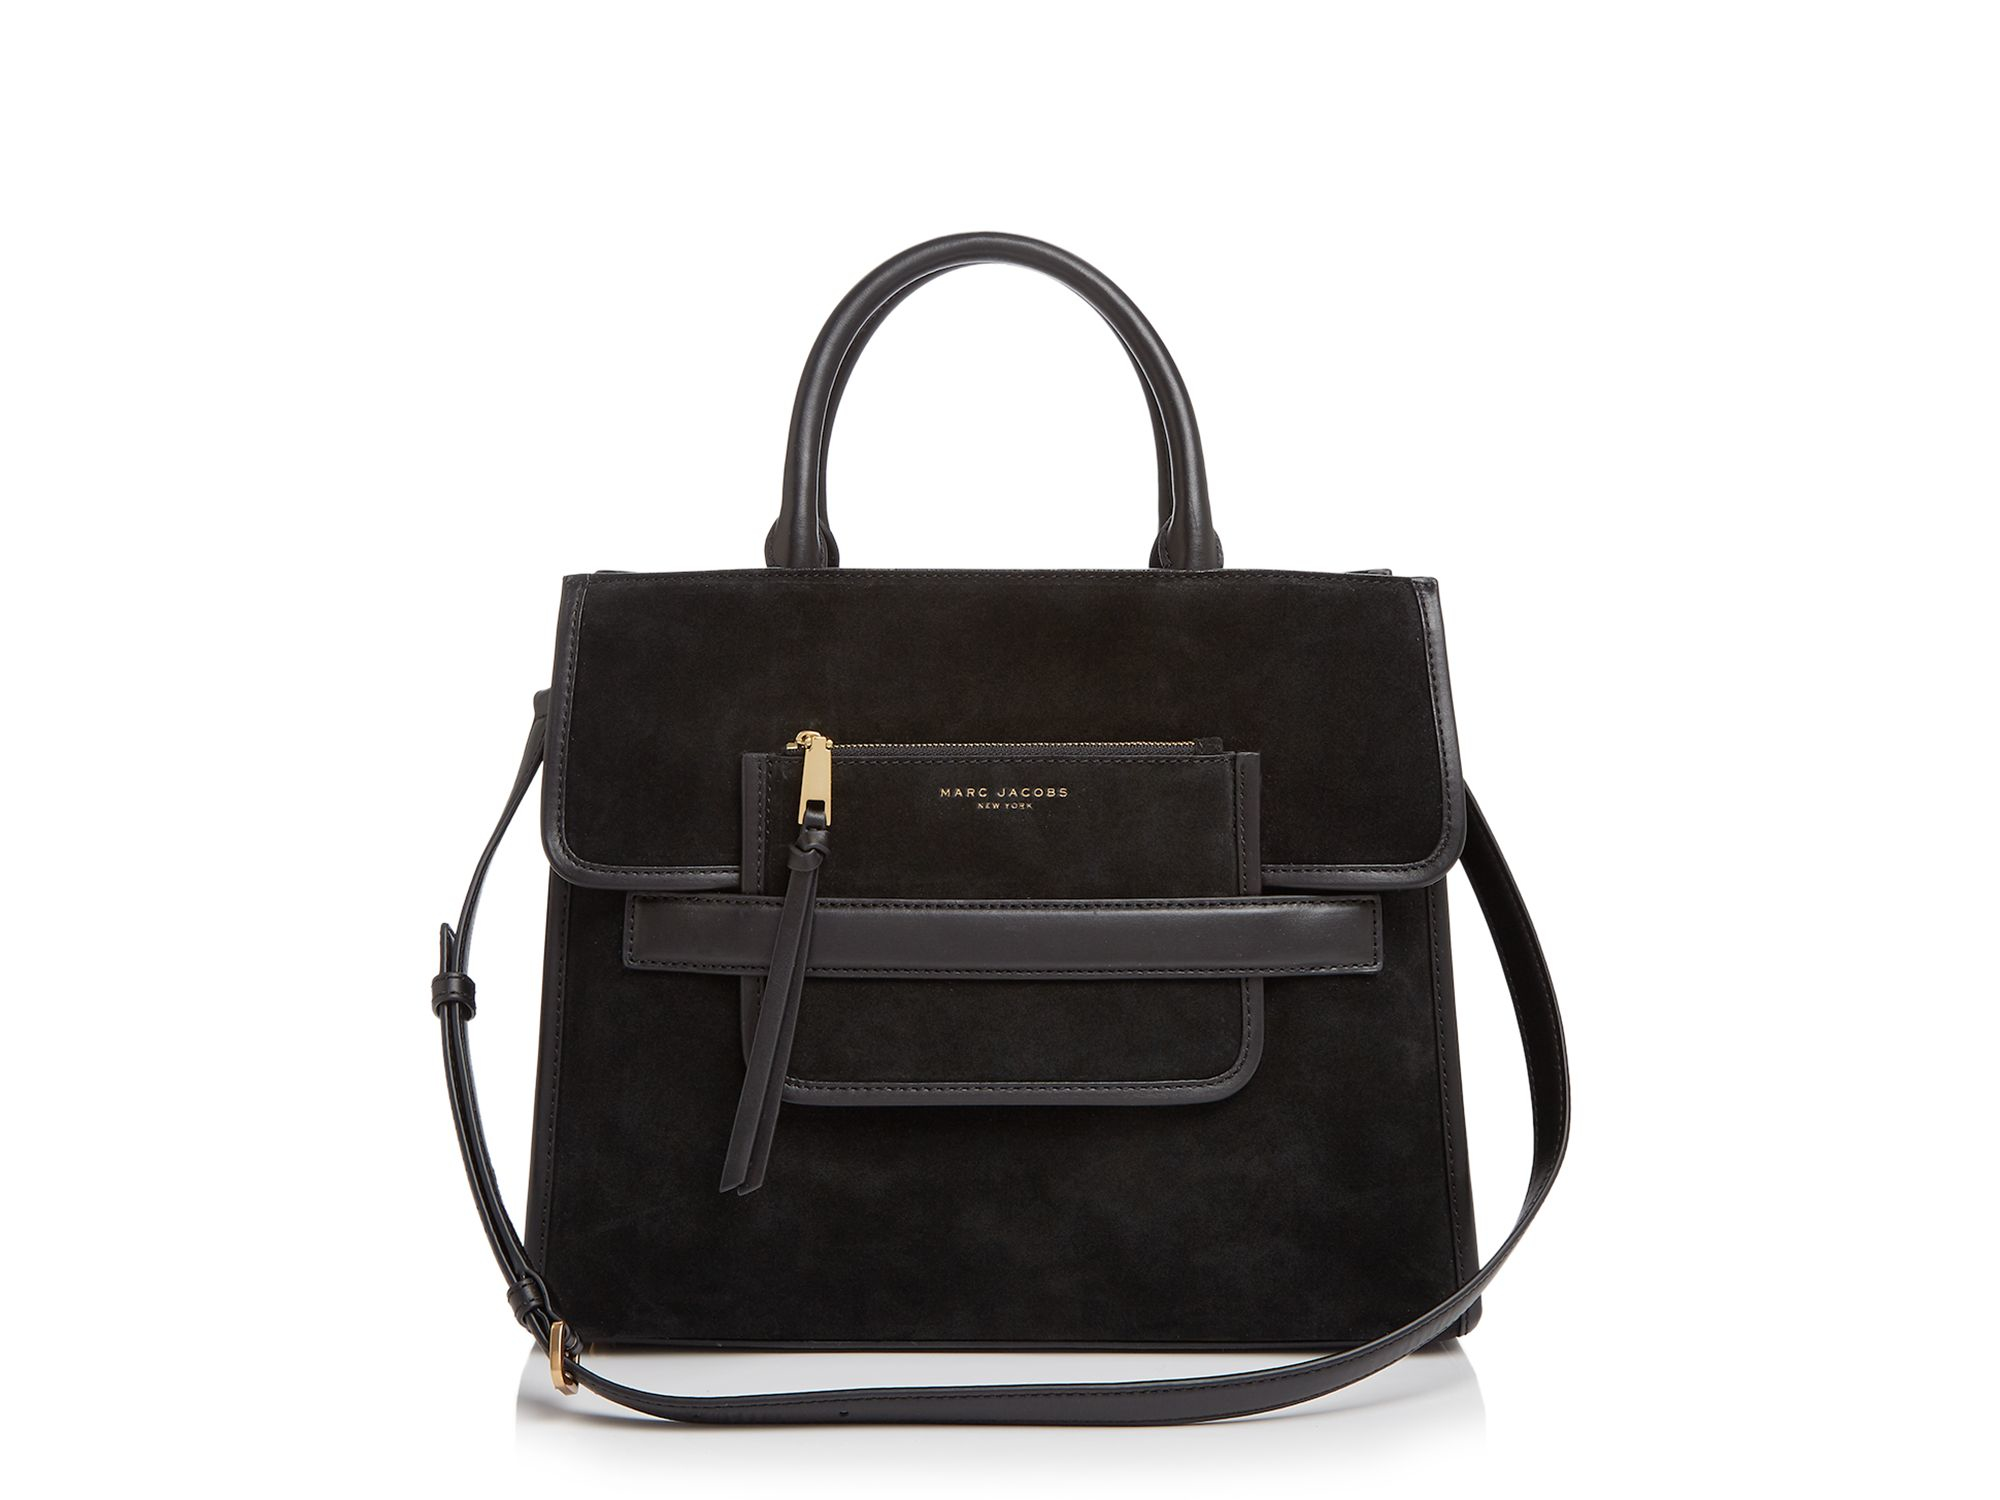 Marc Jacobs Madison Suede Tote in Black - Lyst